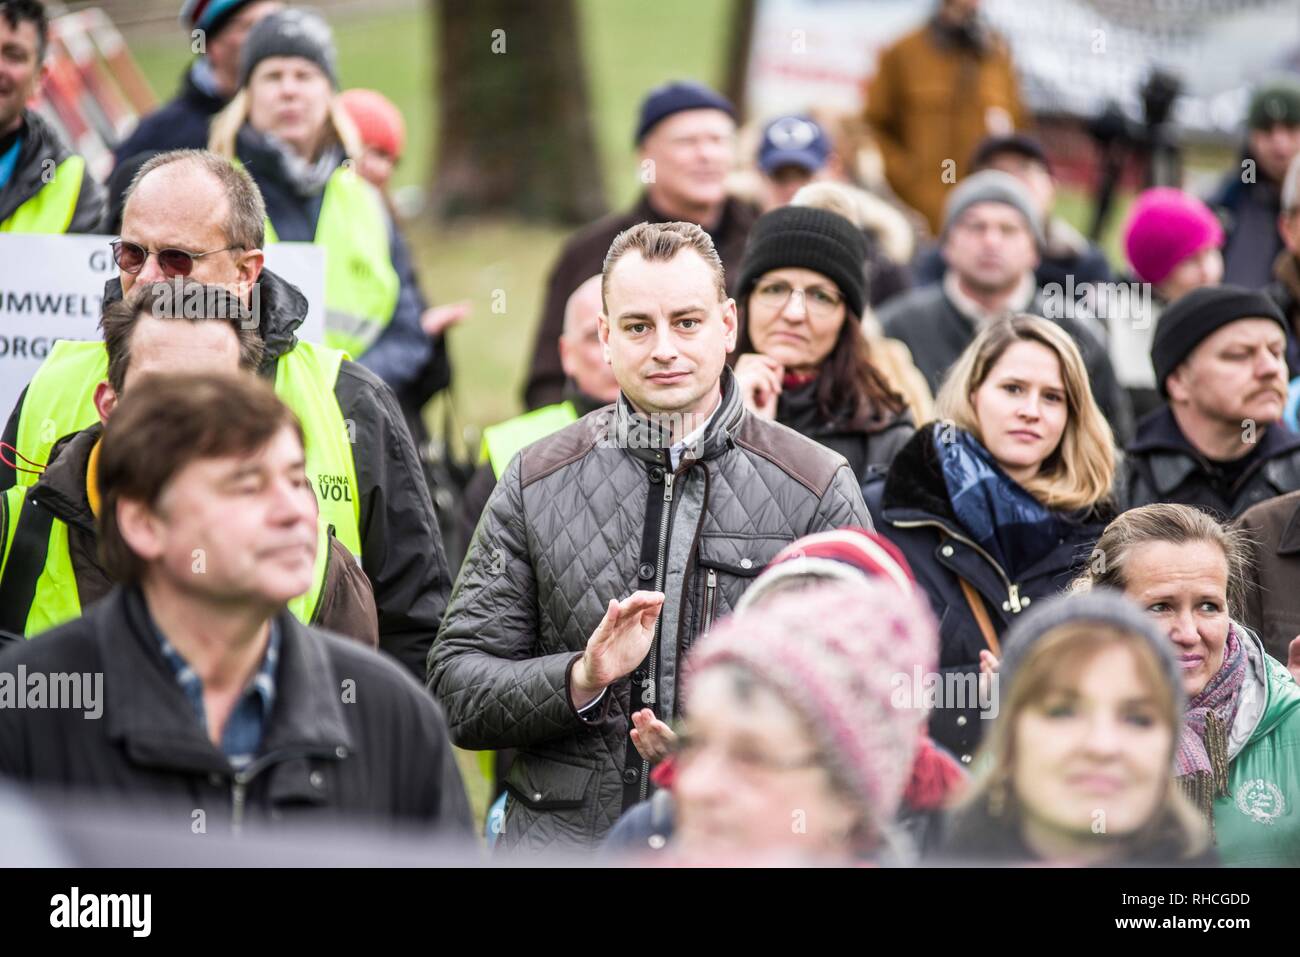 Munich, Bavaria, Germany. 2nd Feb, 2019. Benjamin Nolte of the far-right Alternative for Germany AfD party. Responding to the prospect of diesel auto bans in major cities in Germany, protestors assembled at an air quality monitoring station in Munich's city center. The event was organized by the Mobil in Deutschland automobile club and is the first protest against the diesel ban in Munich- the home of BMW. Numerous well-known right-extremists and far-right political figures were in attendance and participated, including numerous members of the right-extremist Pegida Munich. Marvin G. Credit: Z Stock Photo